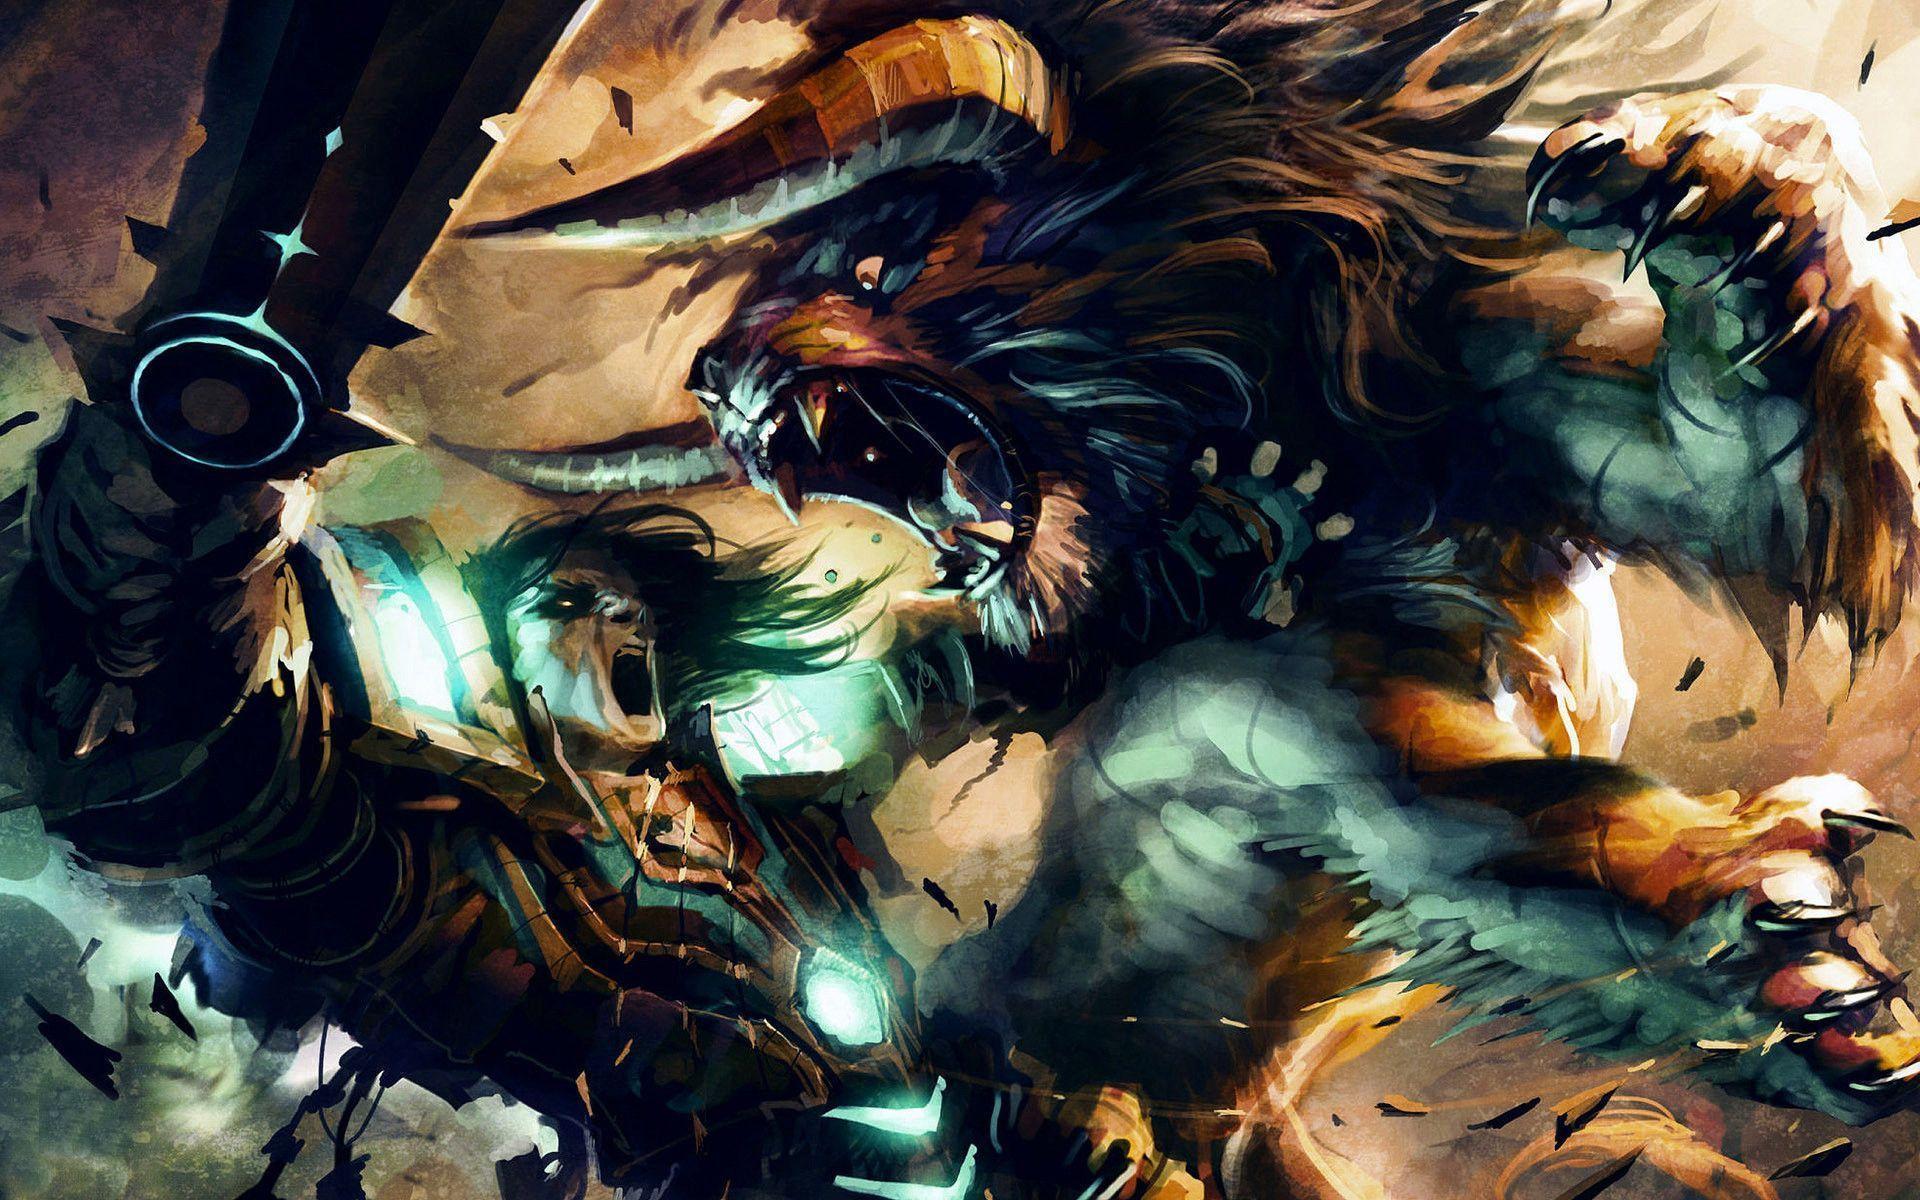 Fight with the mythical creature. Game photo. Desktop wallpaper